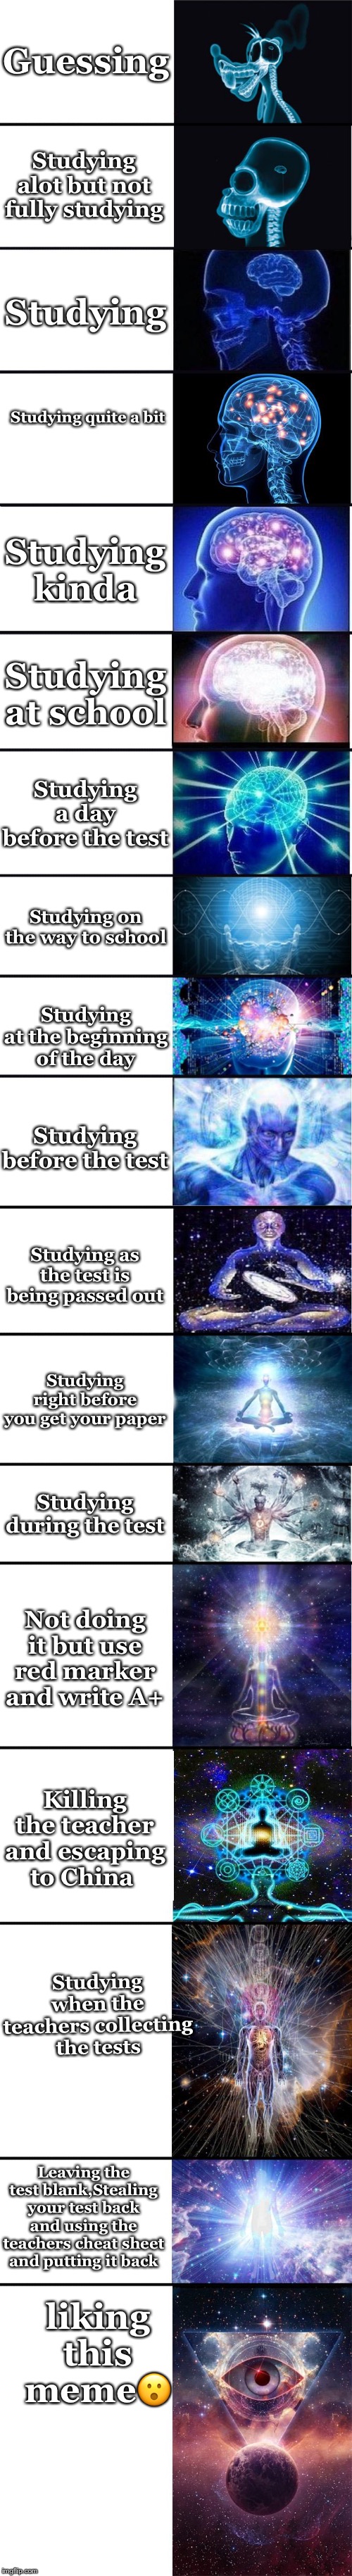 expanding brain: 9001 | Guessing; Studying alot but not fully studying; Studying; Studying quite a bit; Studying kinda; Studying at school; Studying a day before the test; Studying on the way to school; Studying at the beginning of the day; Studying before the test; Studying as the test is being passed out; Studying right before you get your paper; Studying during the test; Not doing it but use red marker and write A+; Killing the teacher and escaping to China; Studying when the teachers collecting the tests; liking this meme😮; Leaving the test blank,Stealing your test back and using the teachers cheat sheet and putting it back | image tagged in expanding brain 9001 | made w/ Imgflip meme maker